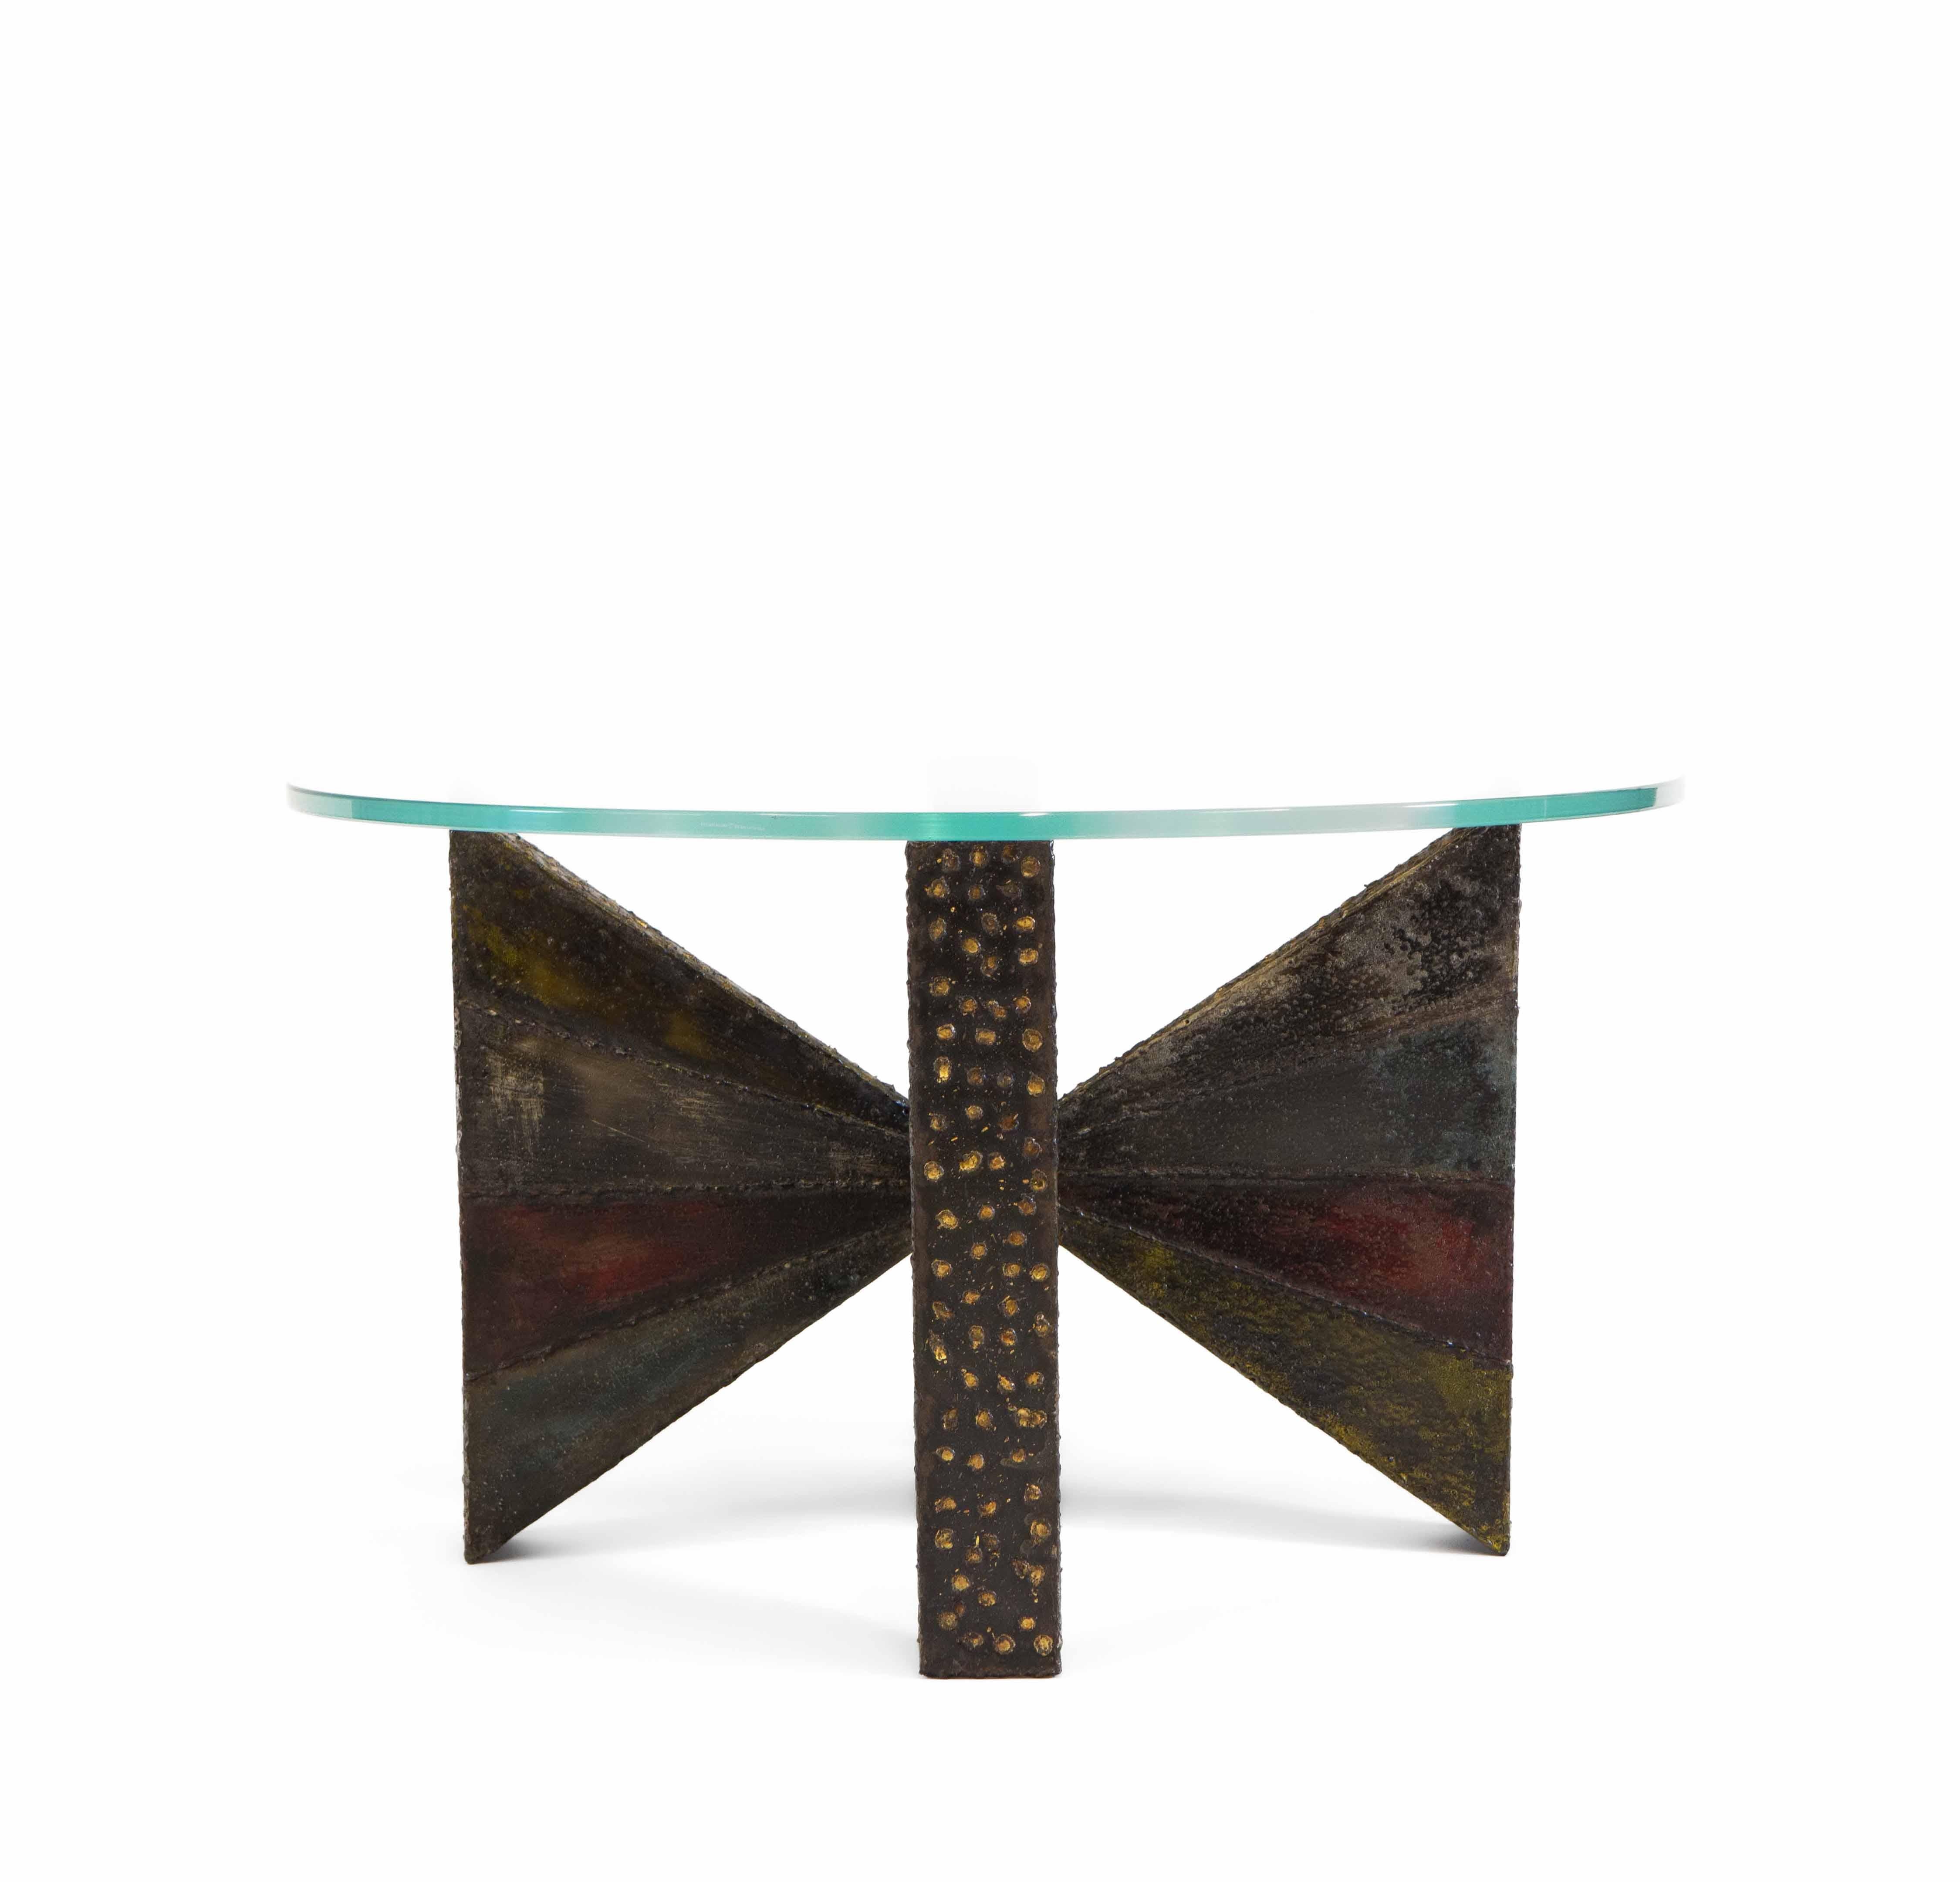 Sculpted steel coffee table by designer and sculptor Paul Evans (1931-1987) for Directional. USA 1967. Signed 'PE 67'.

Made of welded steel and polychrome, the table features artistic contrasting brazed brass decoration.

Paul Evans’